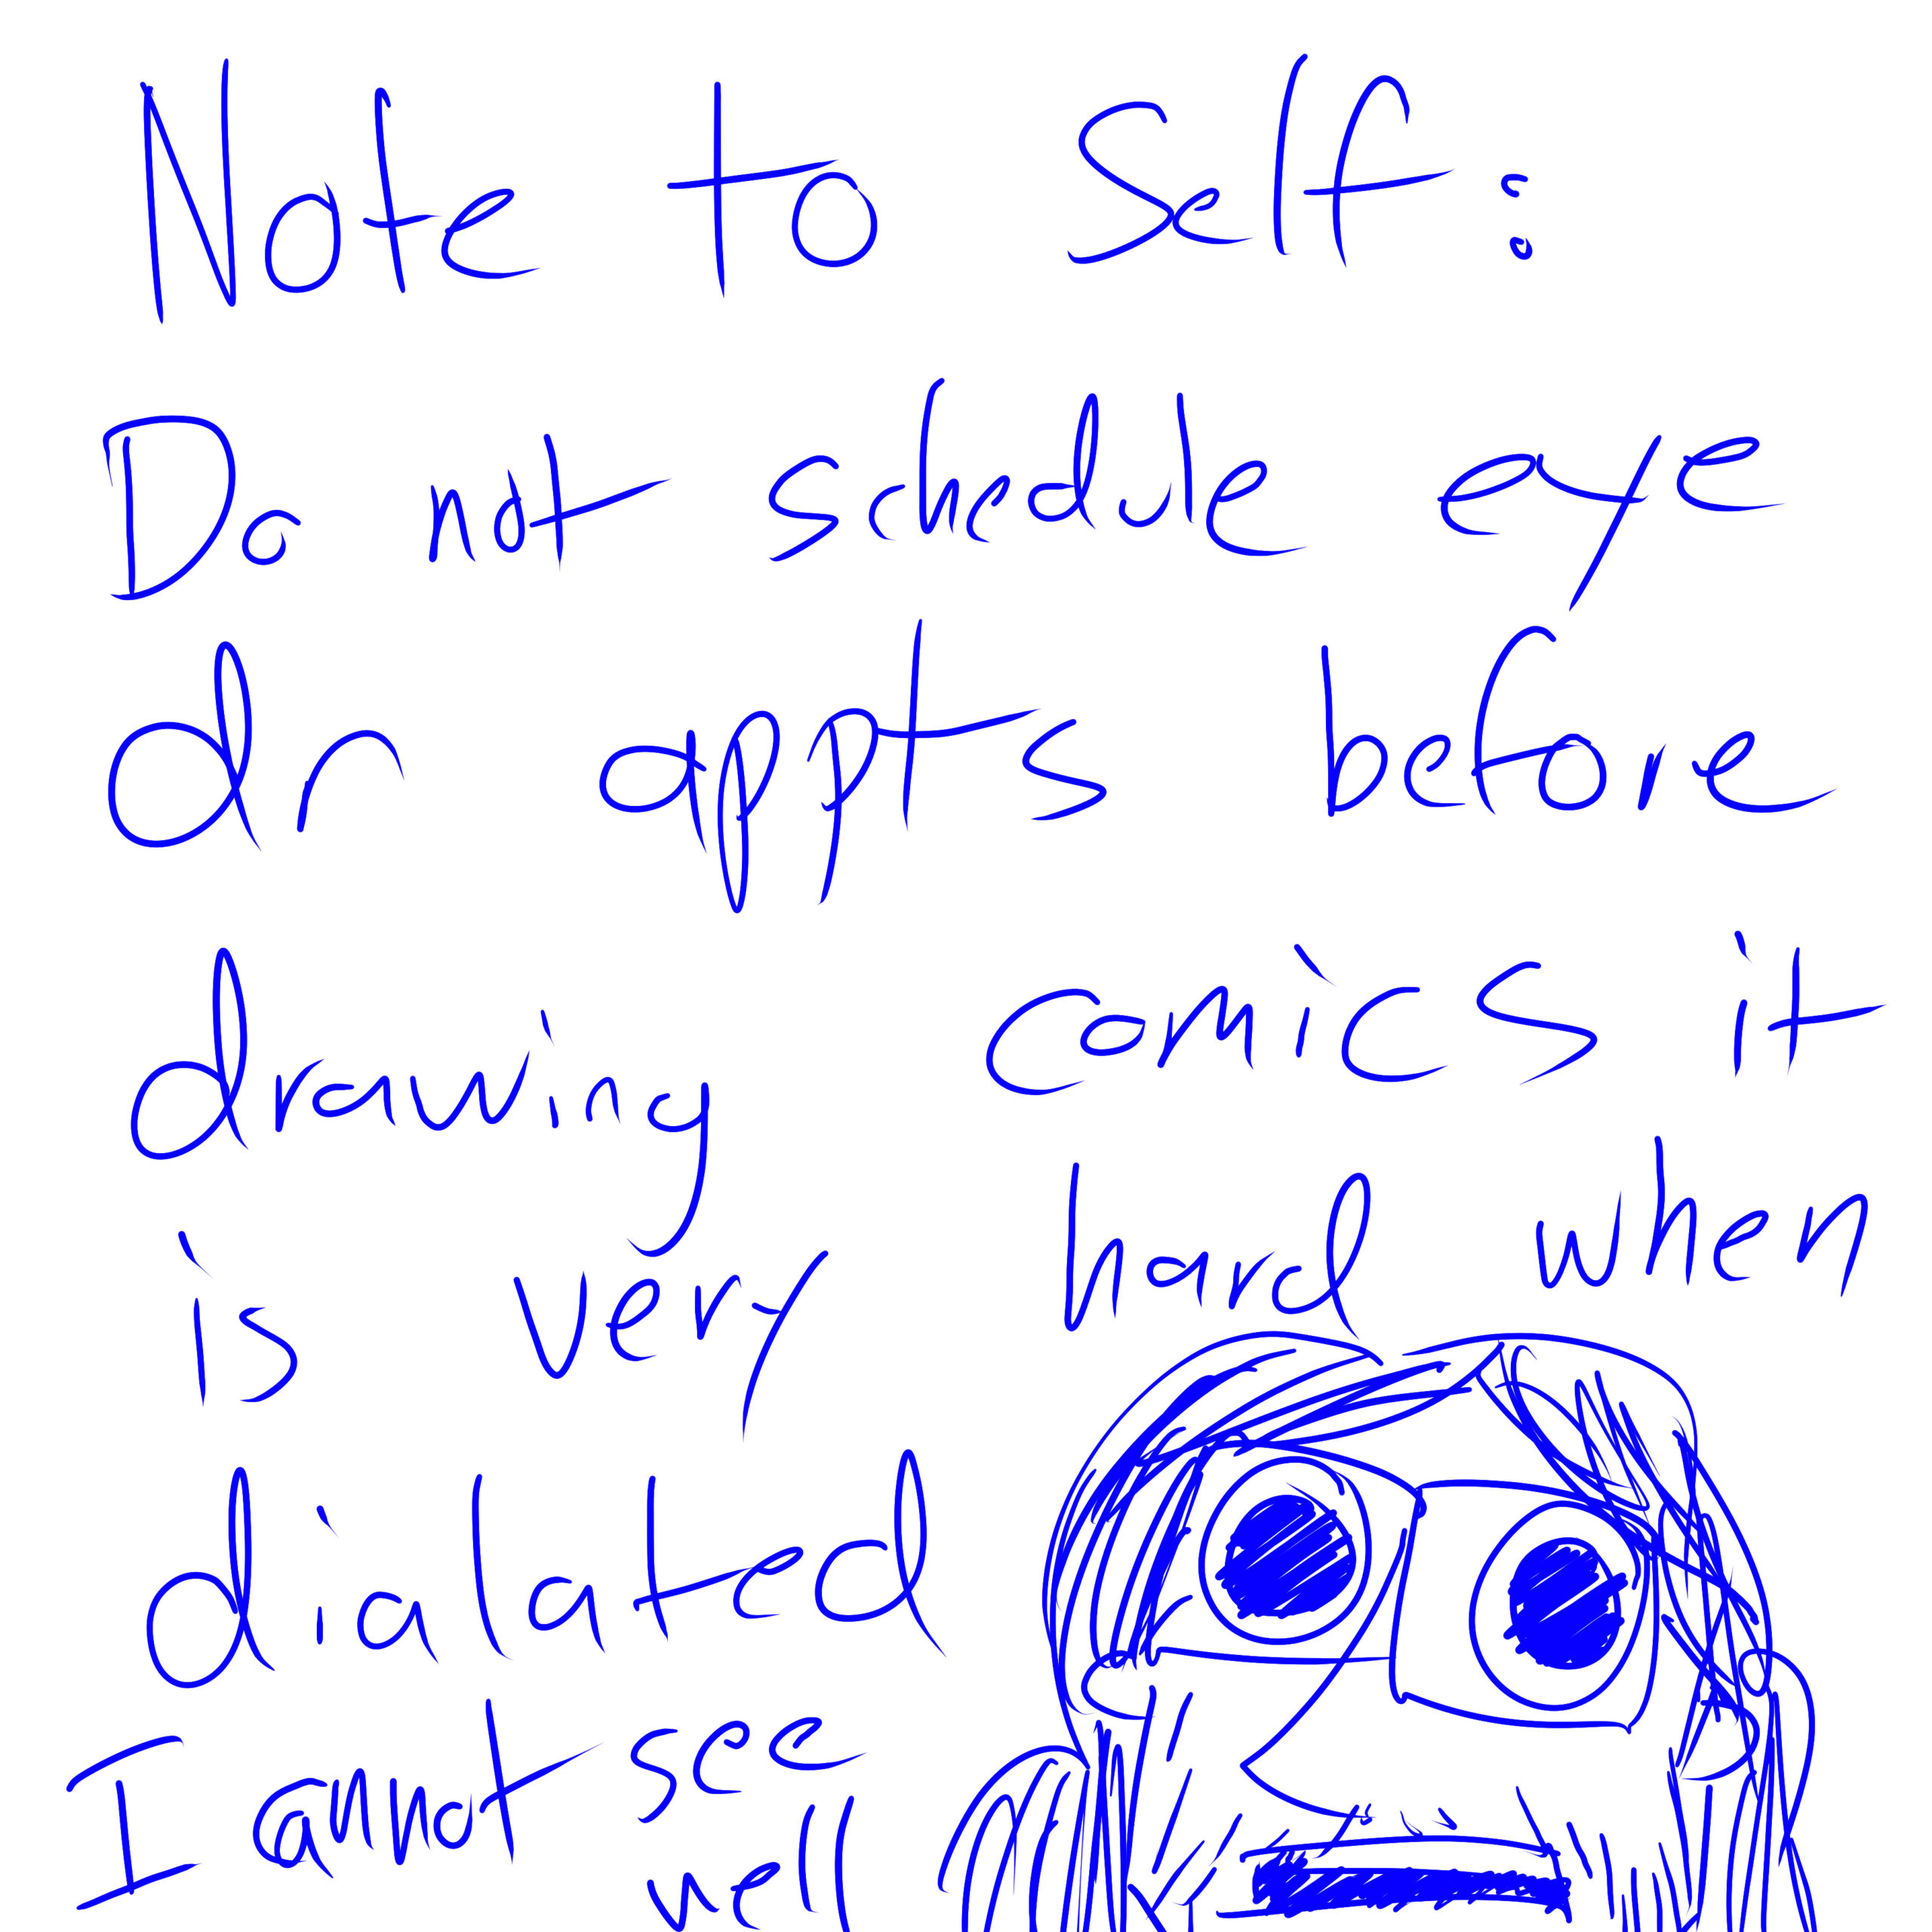 It is hard to draw when you can’t look at screens